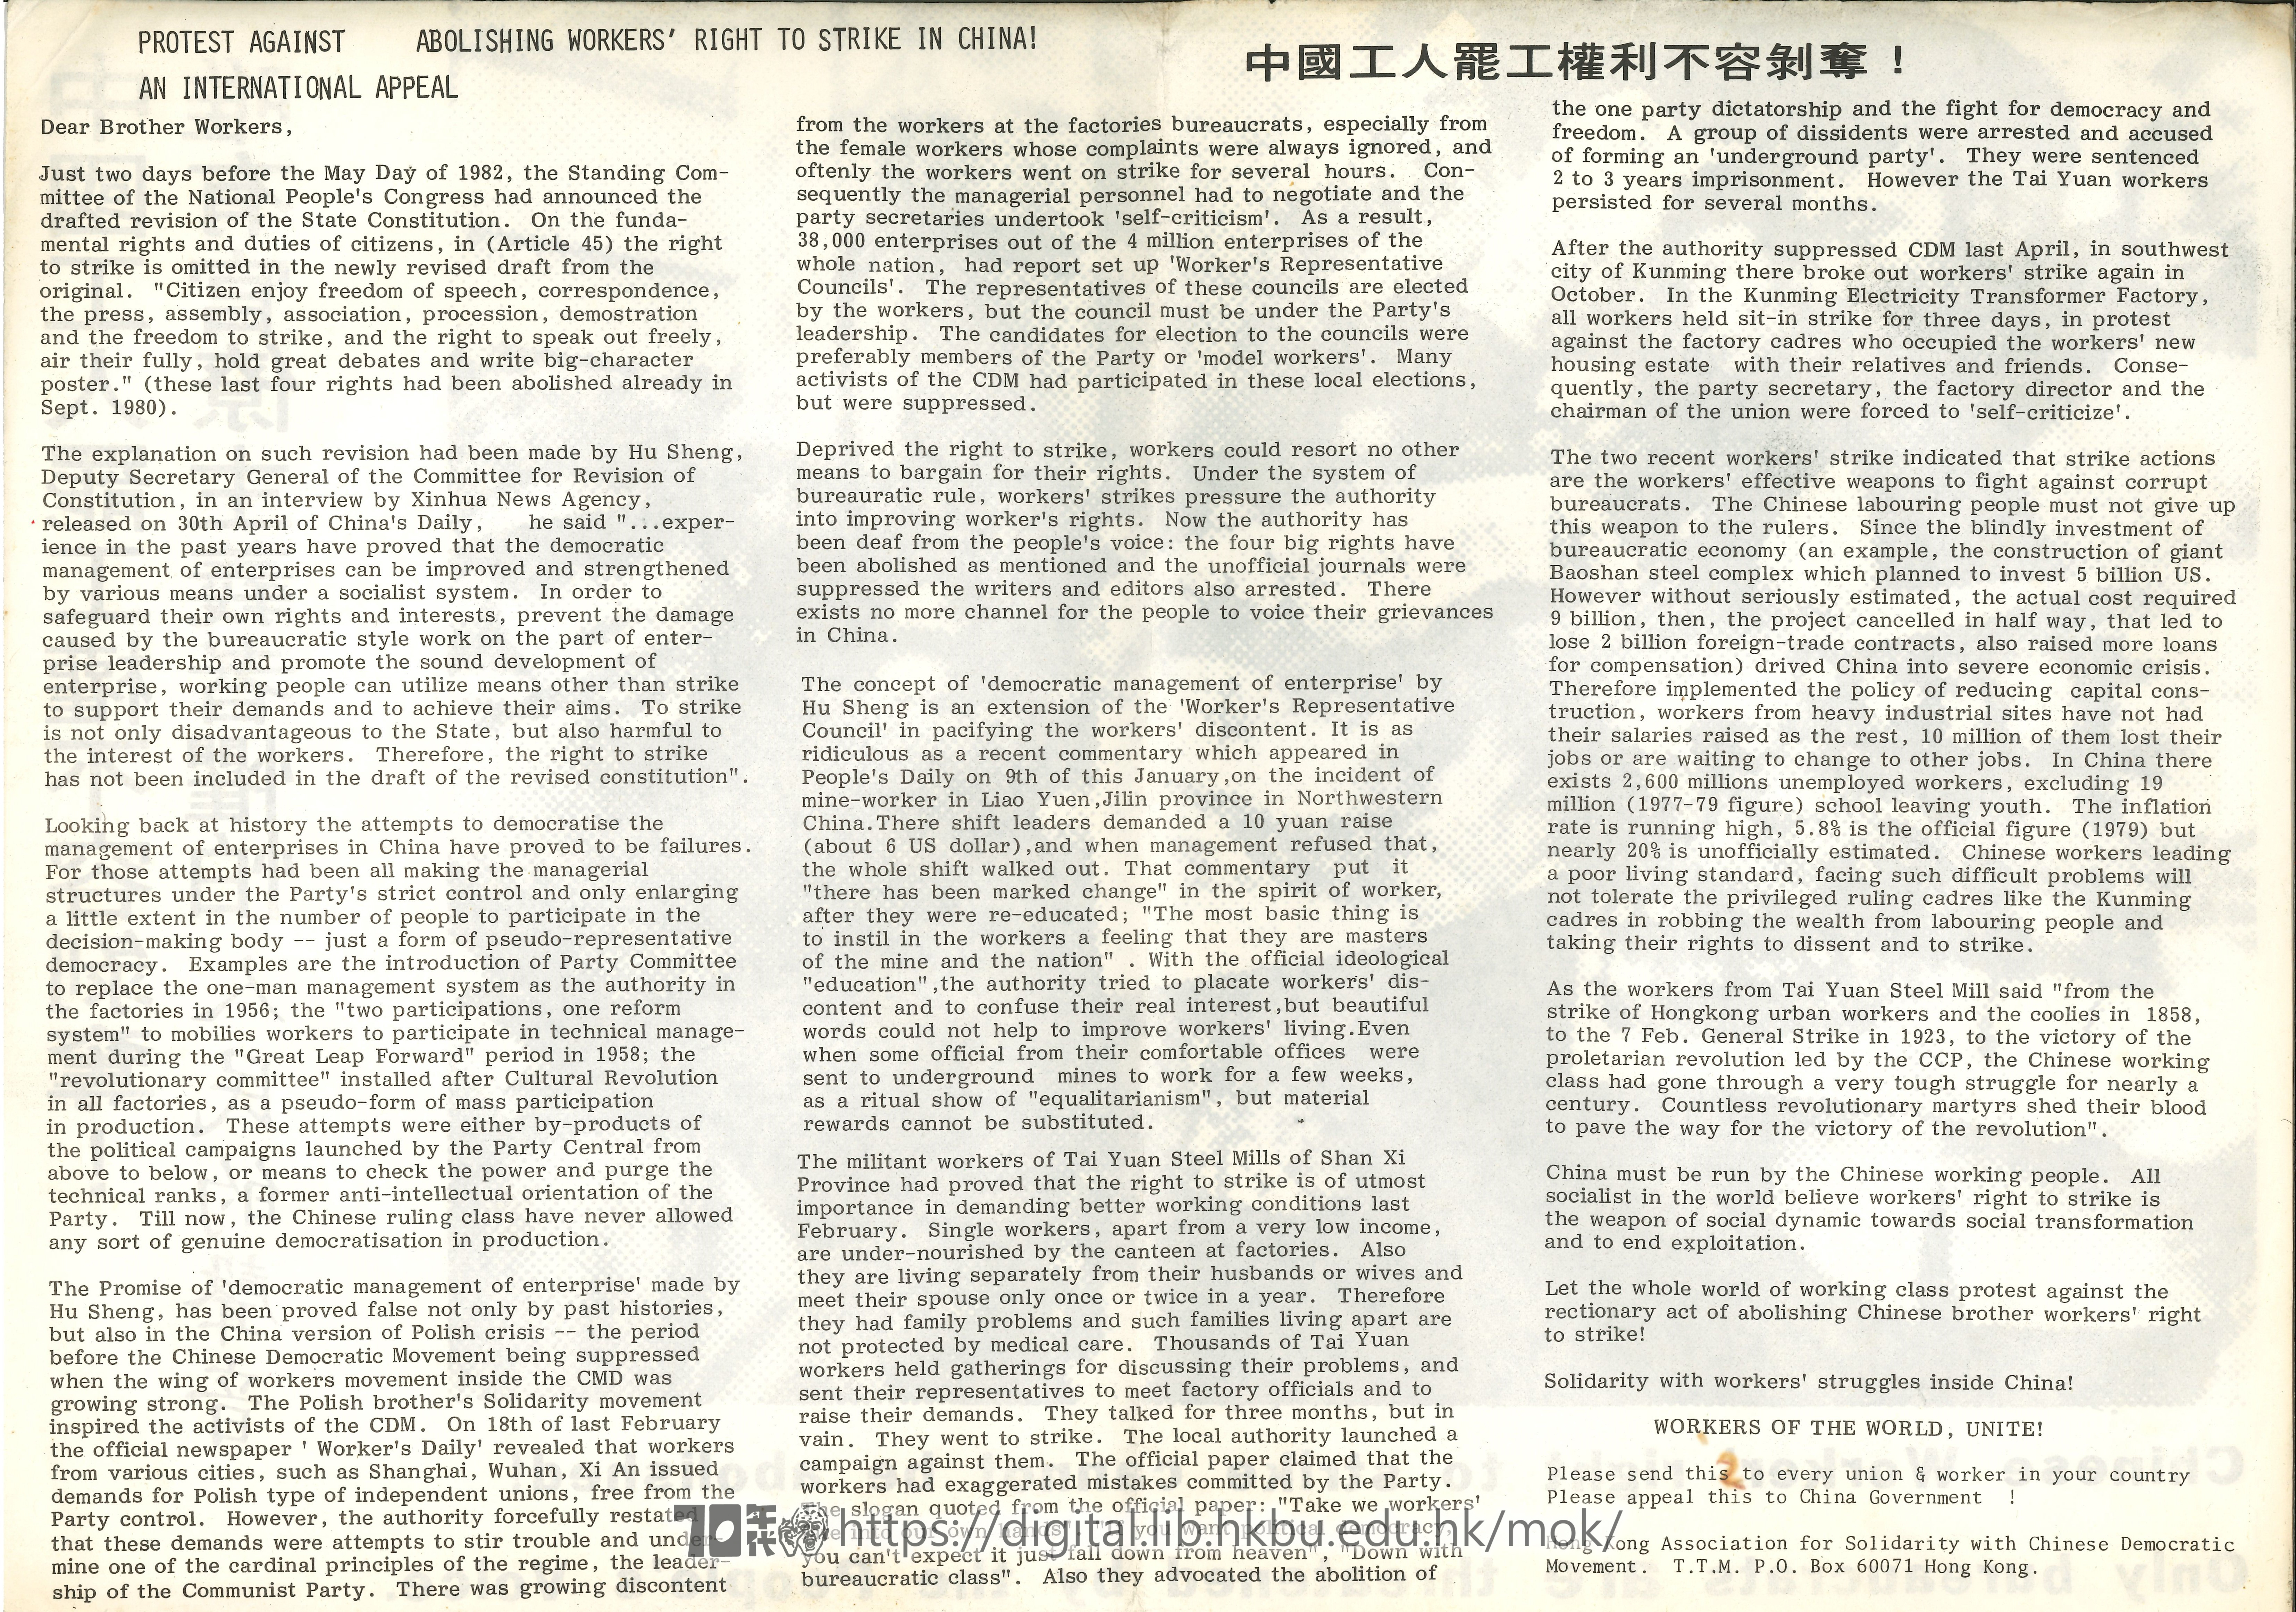   Newsletters in support of Chinese activism  